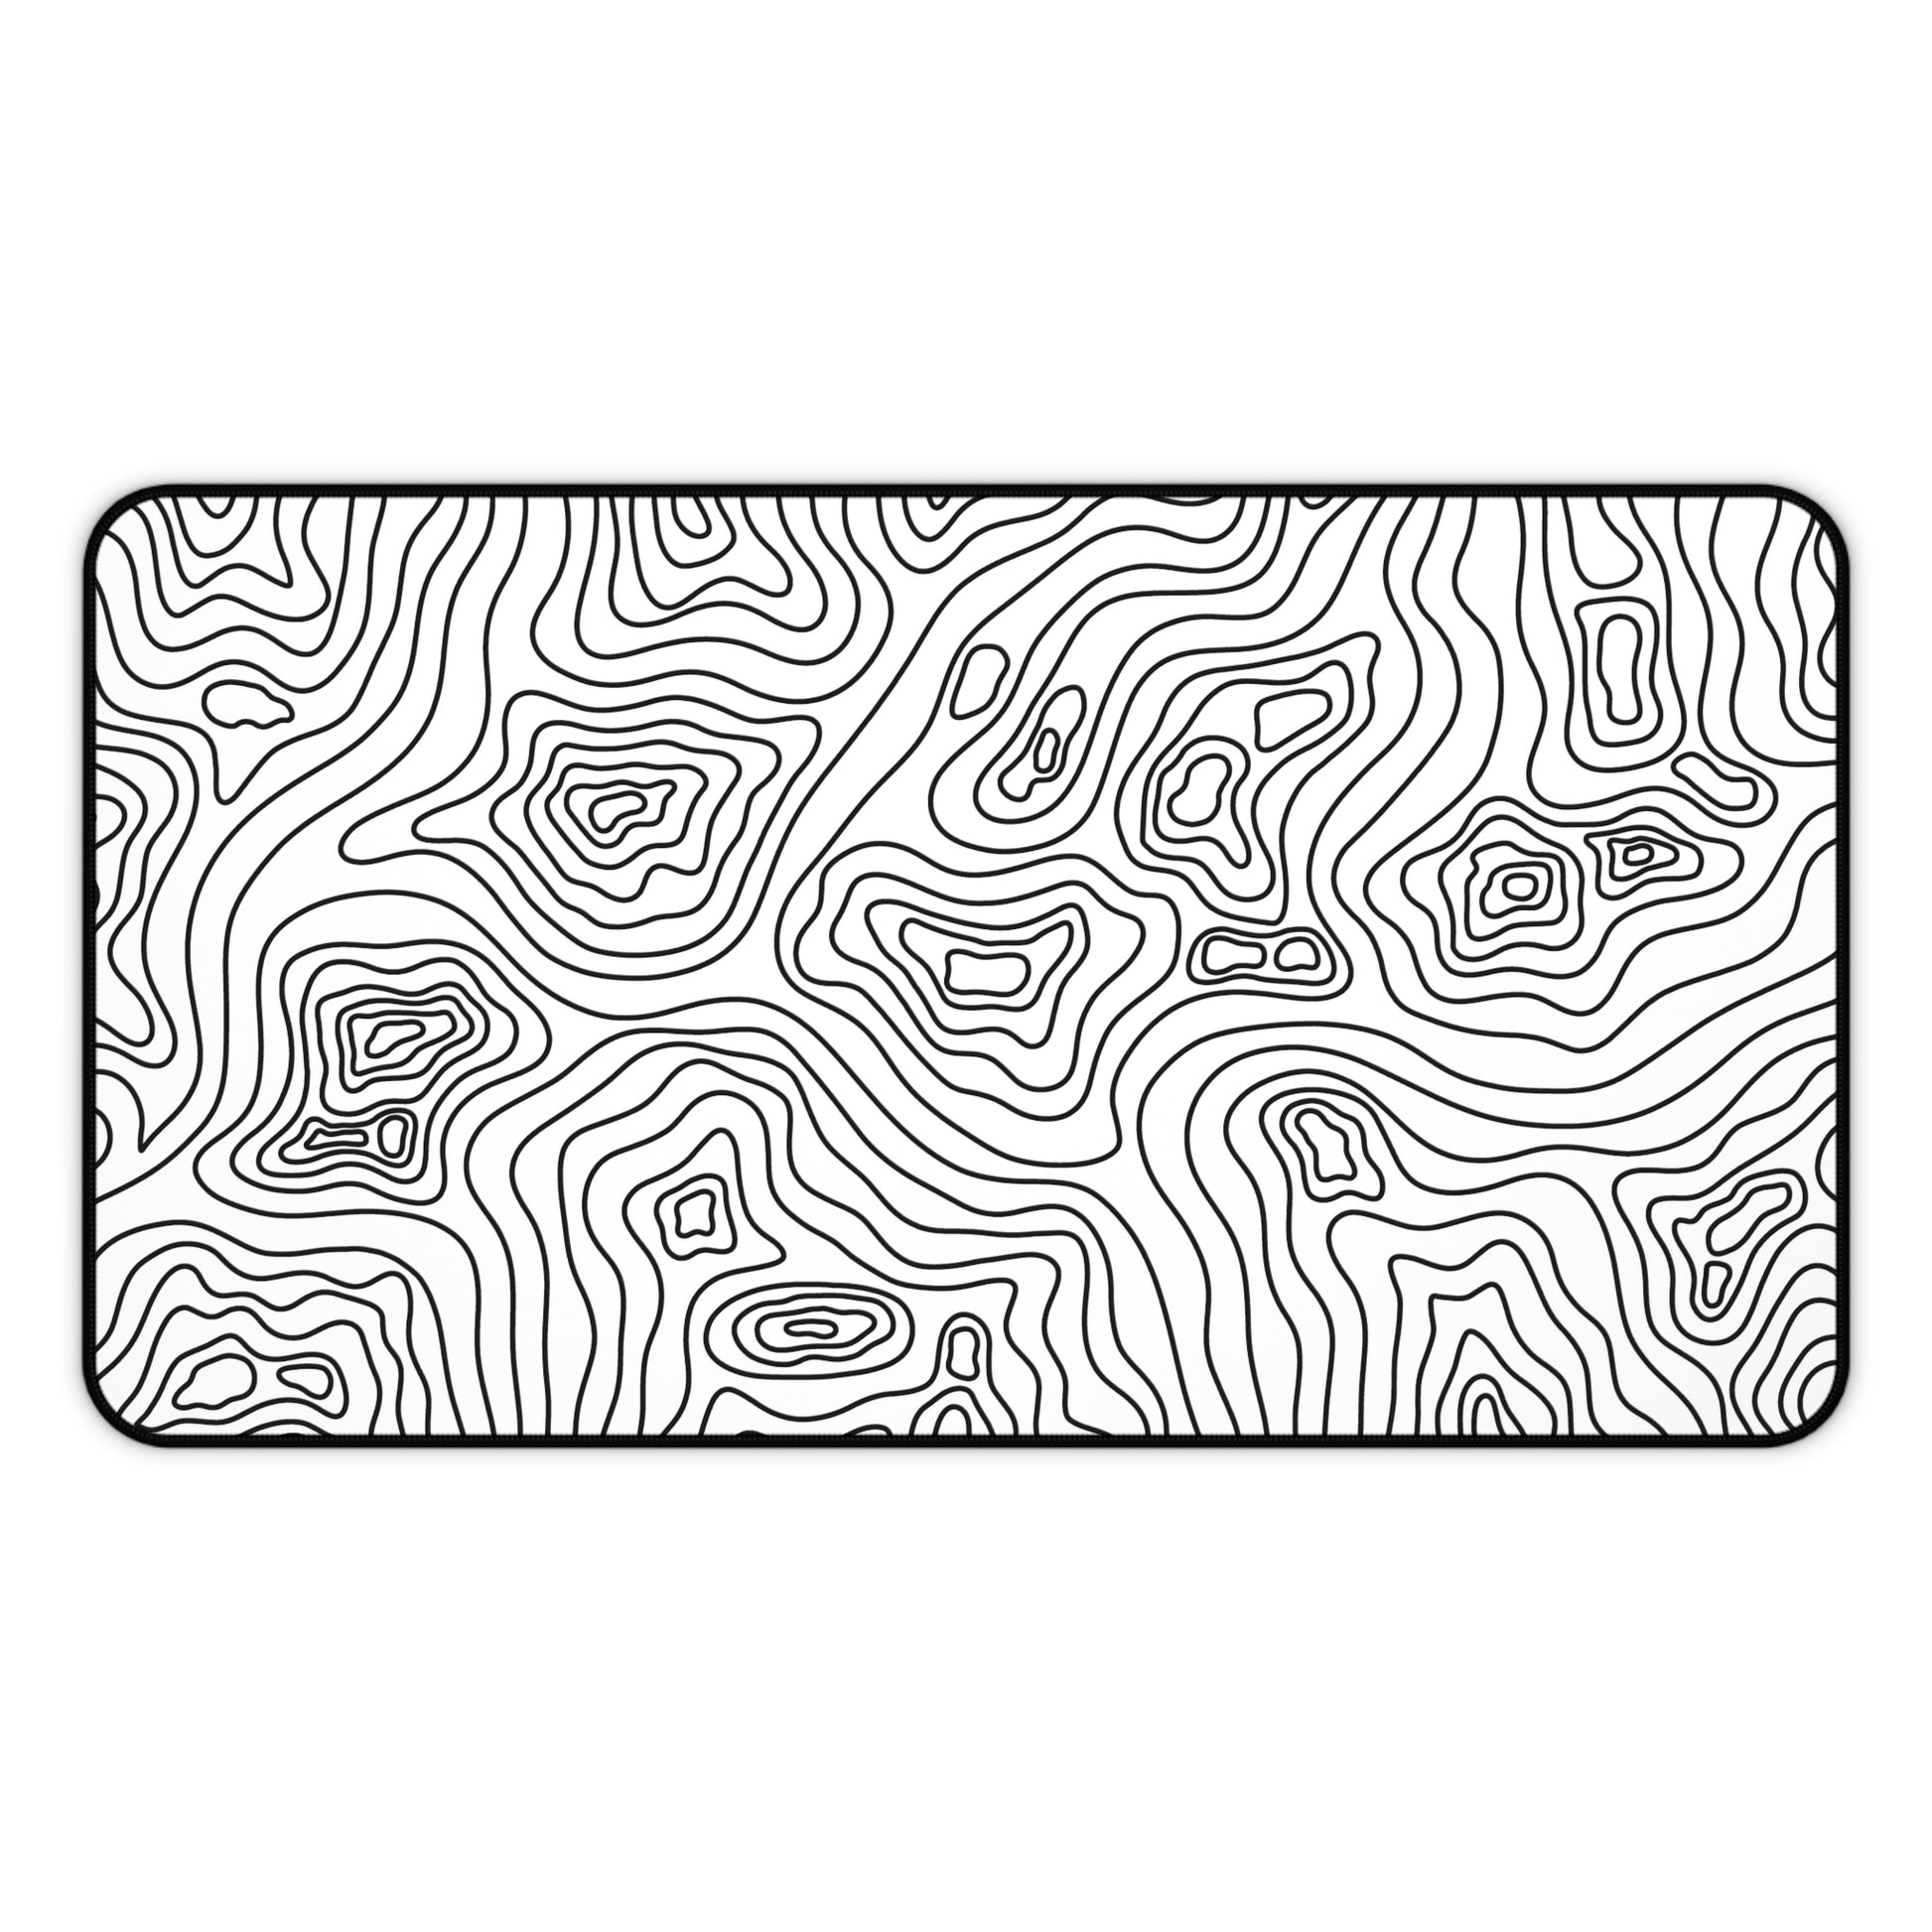 A 12" x 22" white desk mat with black topographic lines.